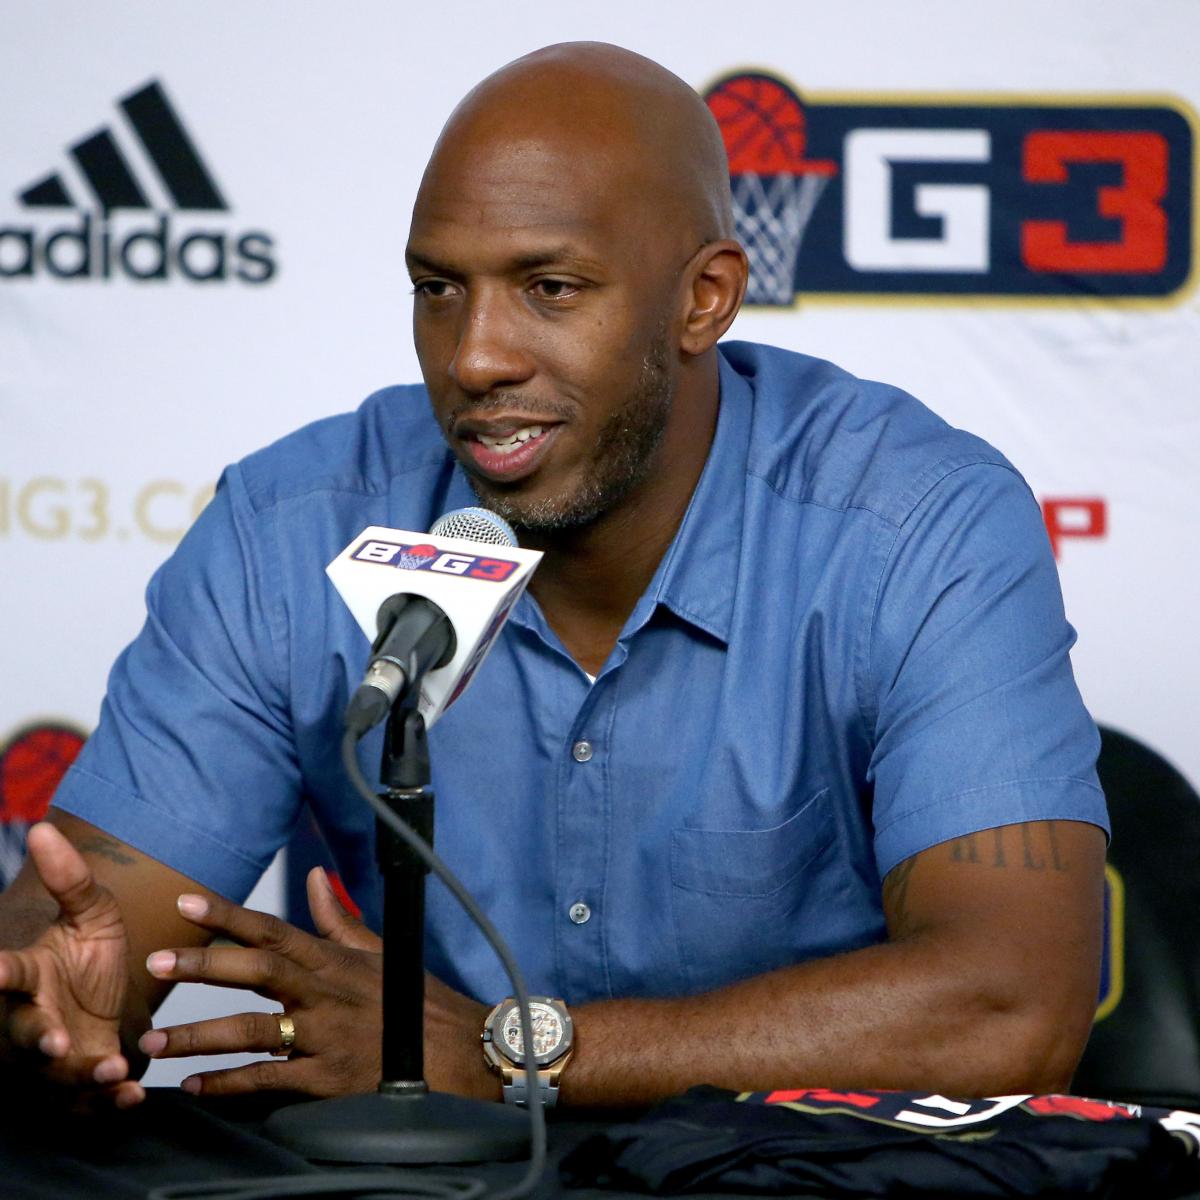 ESPN Analyst Chauncey Billups Retires from BIG3 After 2 Seasons with Killer 3s ...